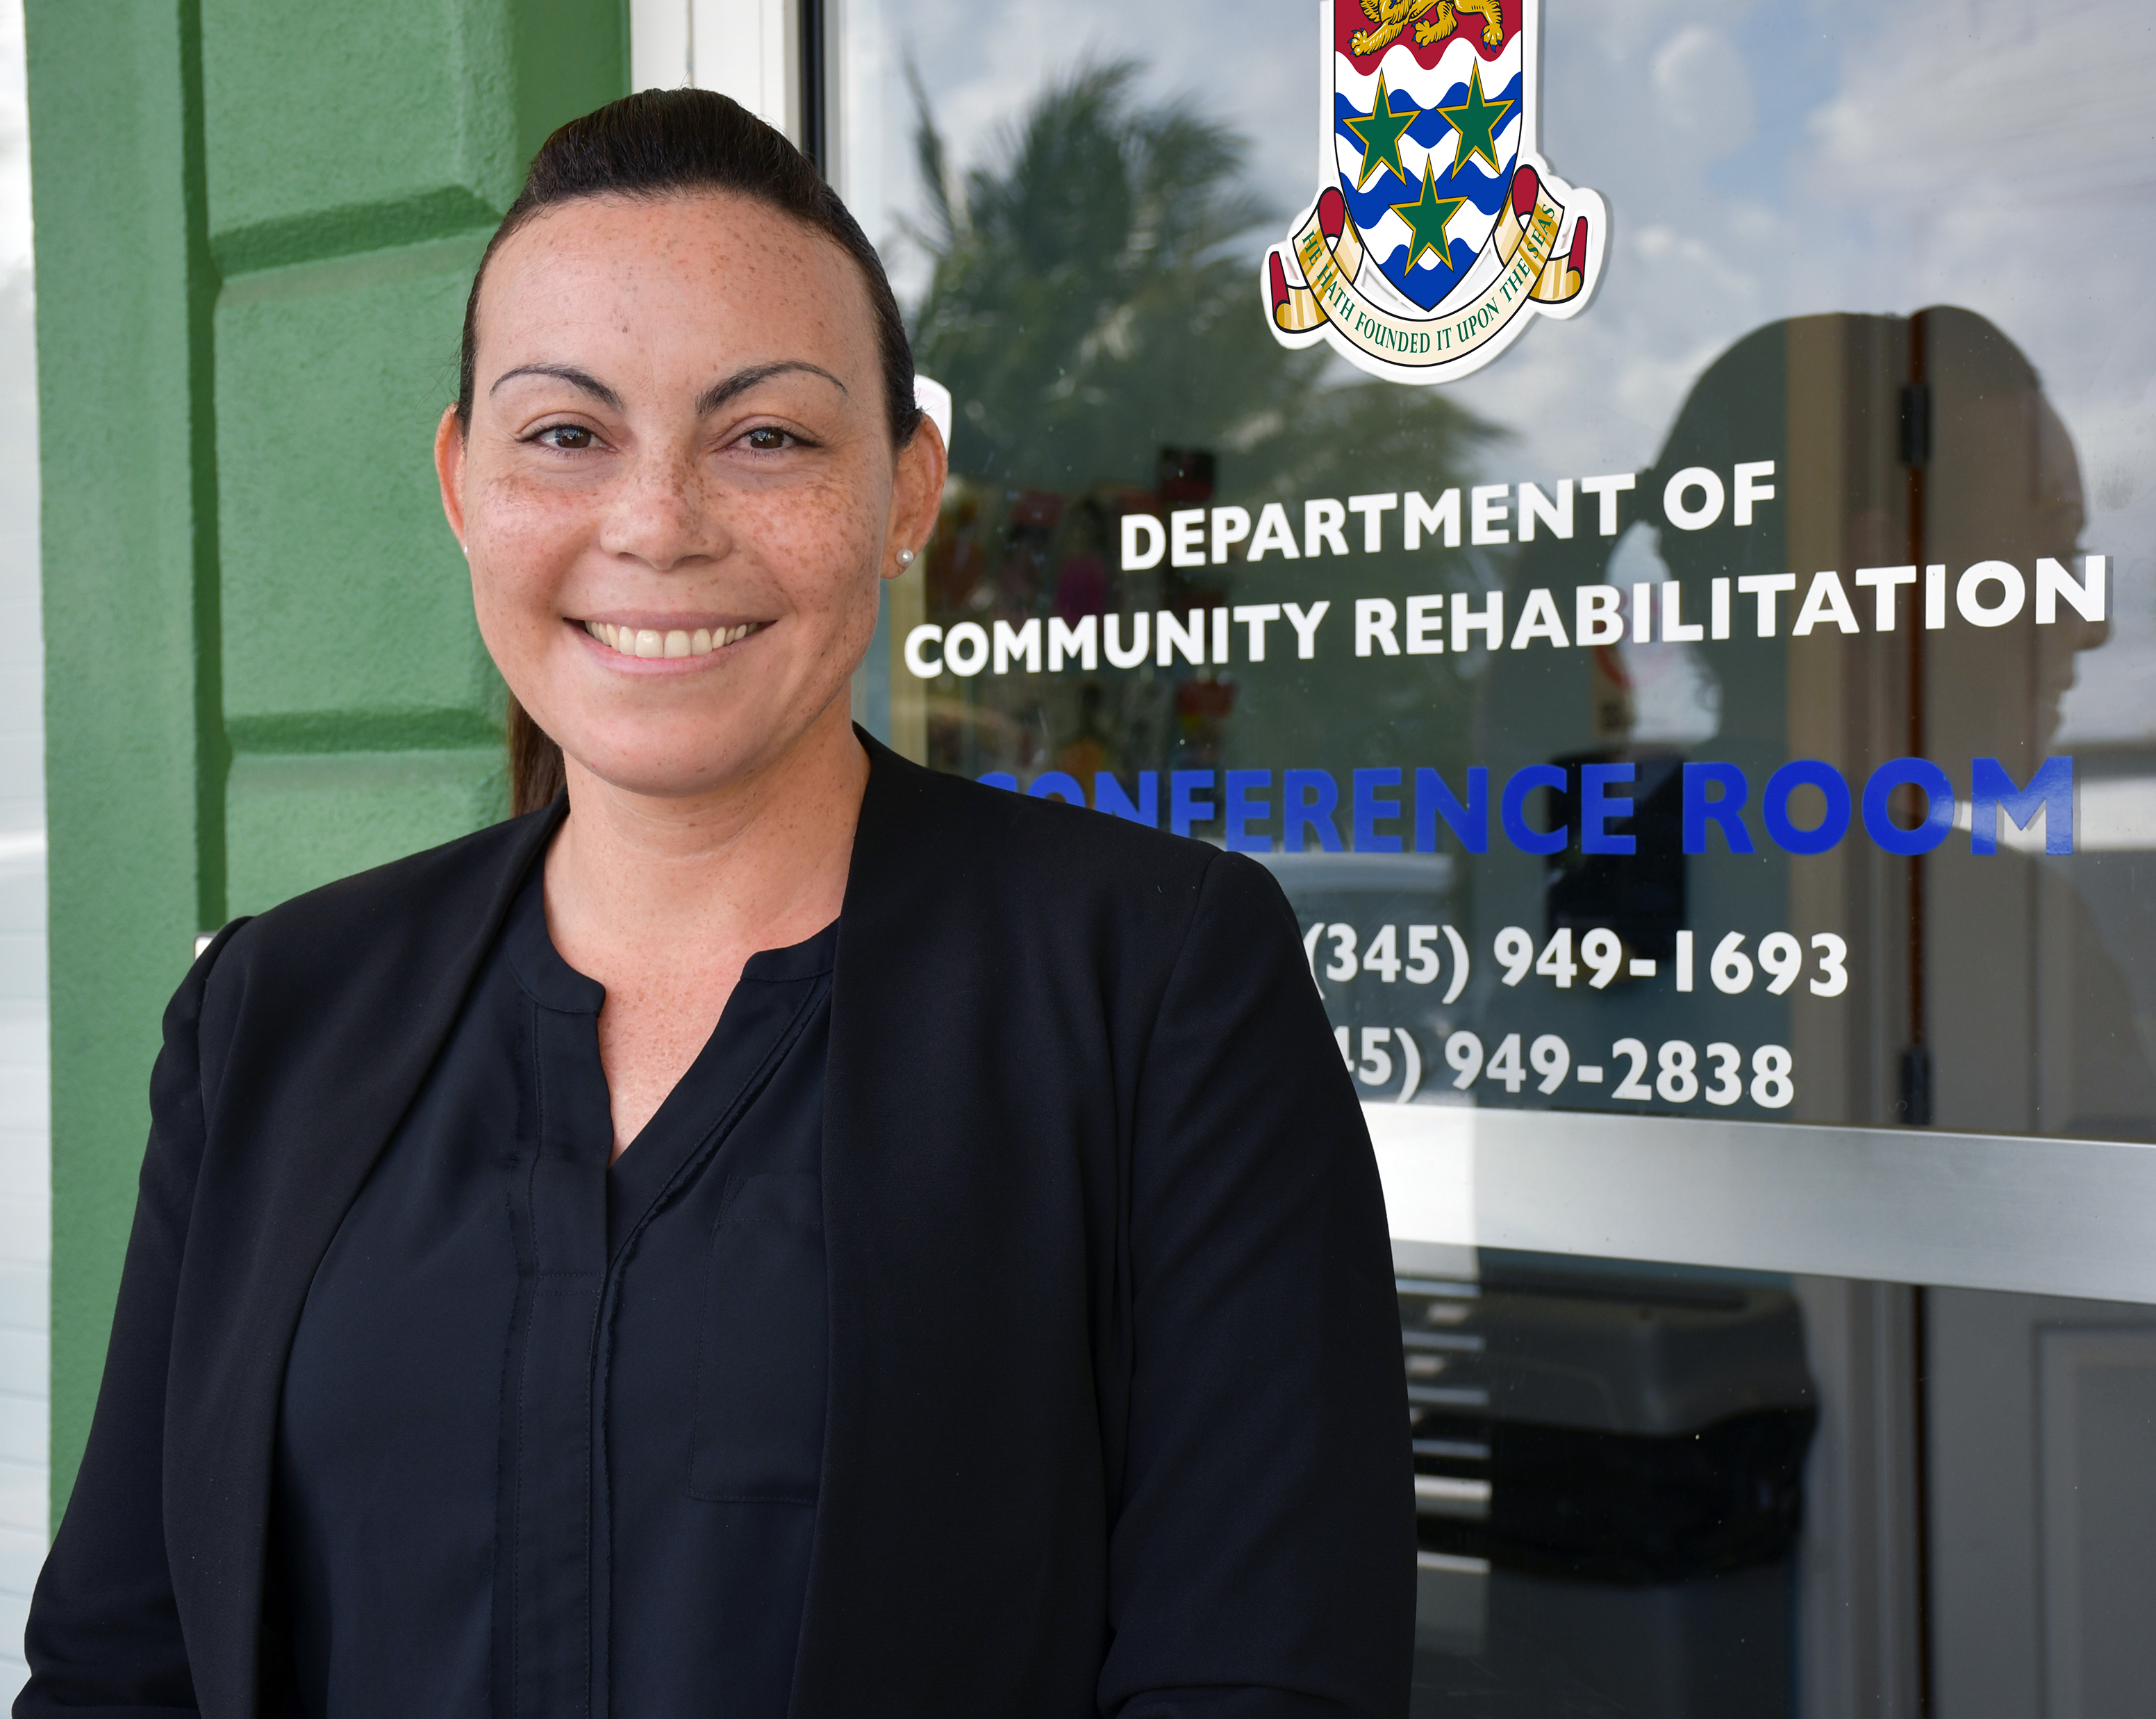 Director for the Department of Community Rehabilitation (DCR).